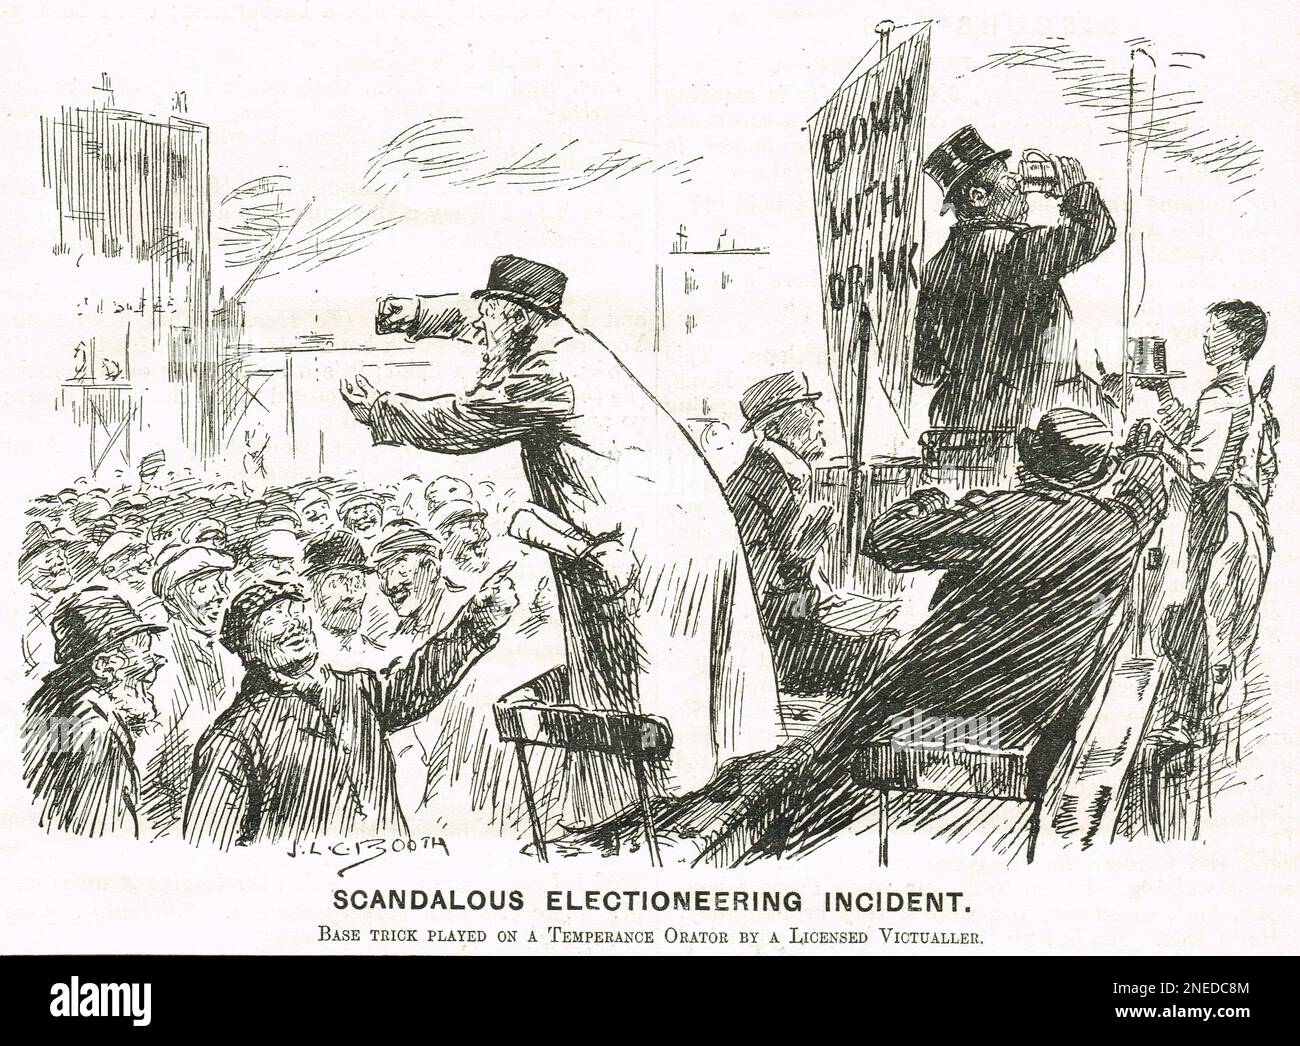 Scandalous electioneering incident. 1908 Punch cartoon by John Lionel Calvert Booth showing a temperance speaker addressing a crowd whilst behind his banner - saying down with drink - a publican is downing a drink.  Described as a base trick on a temperance orator by a licensed victualler. Stock Photo